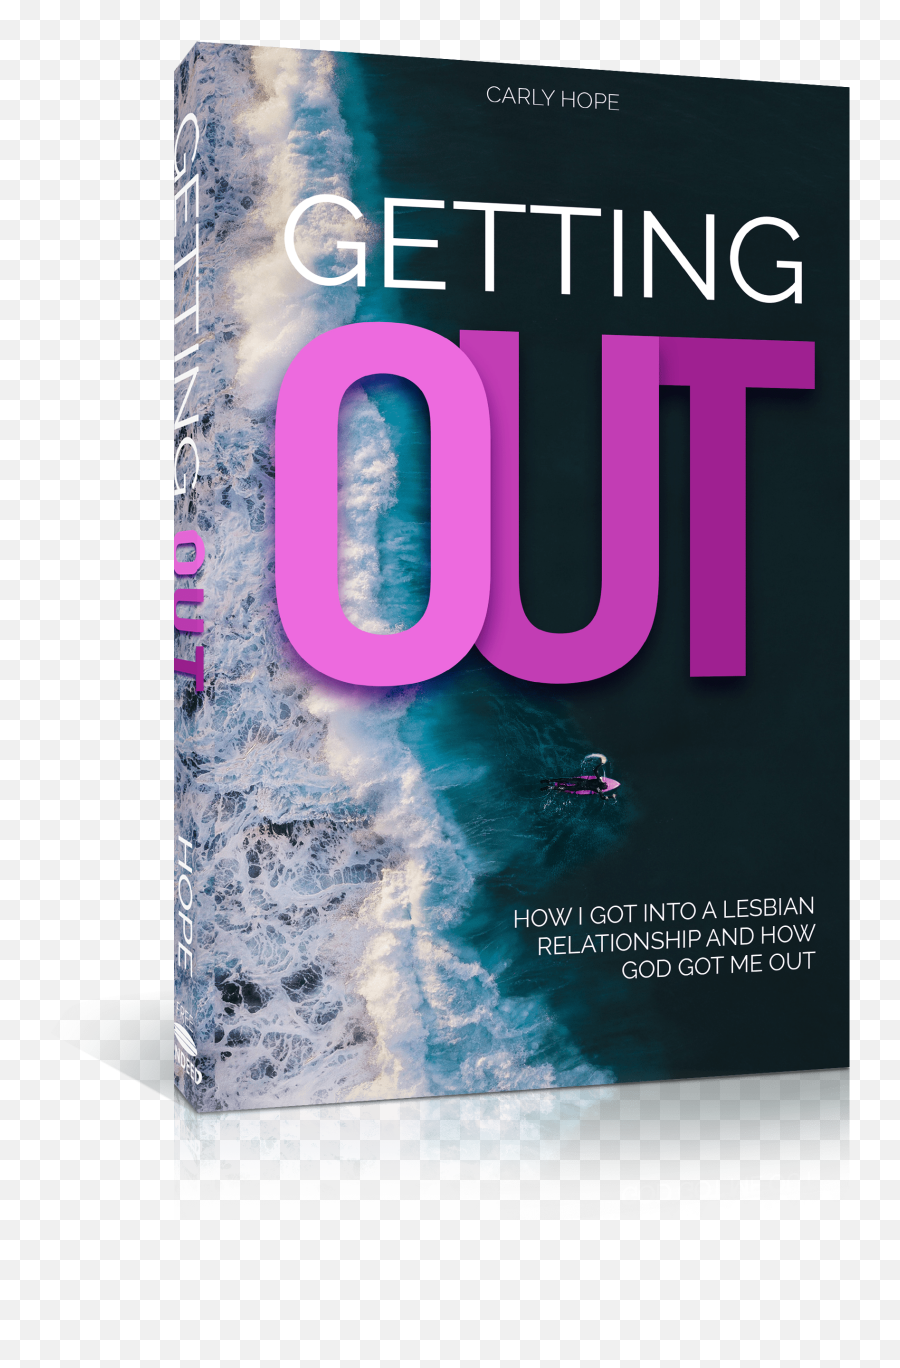 Getting Out - Book Cover Emoji,Matt Chandler Emotions And God